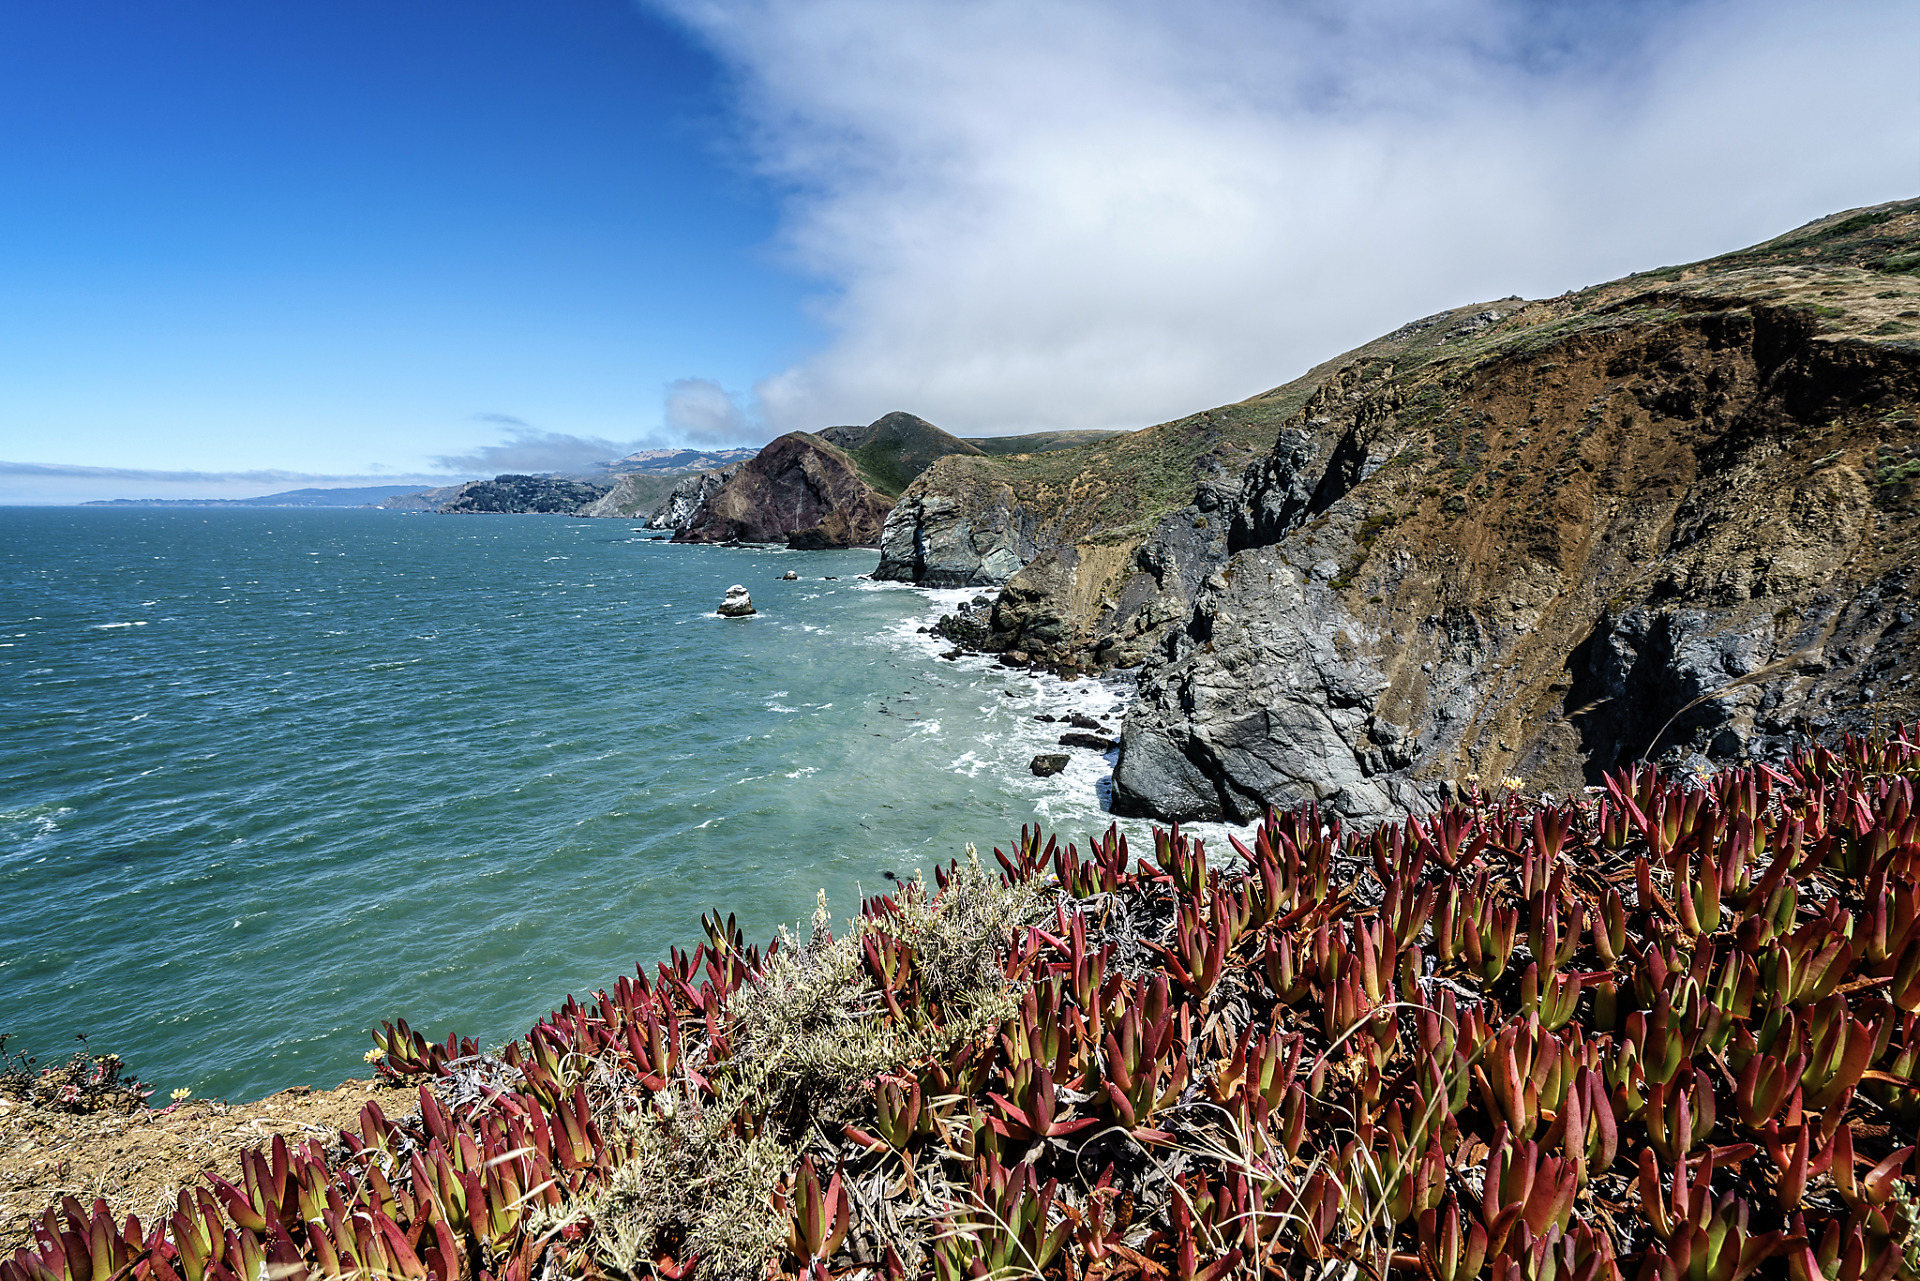 Pacific Ocean from Tennessee Point Bluff in Marin Headlands